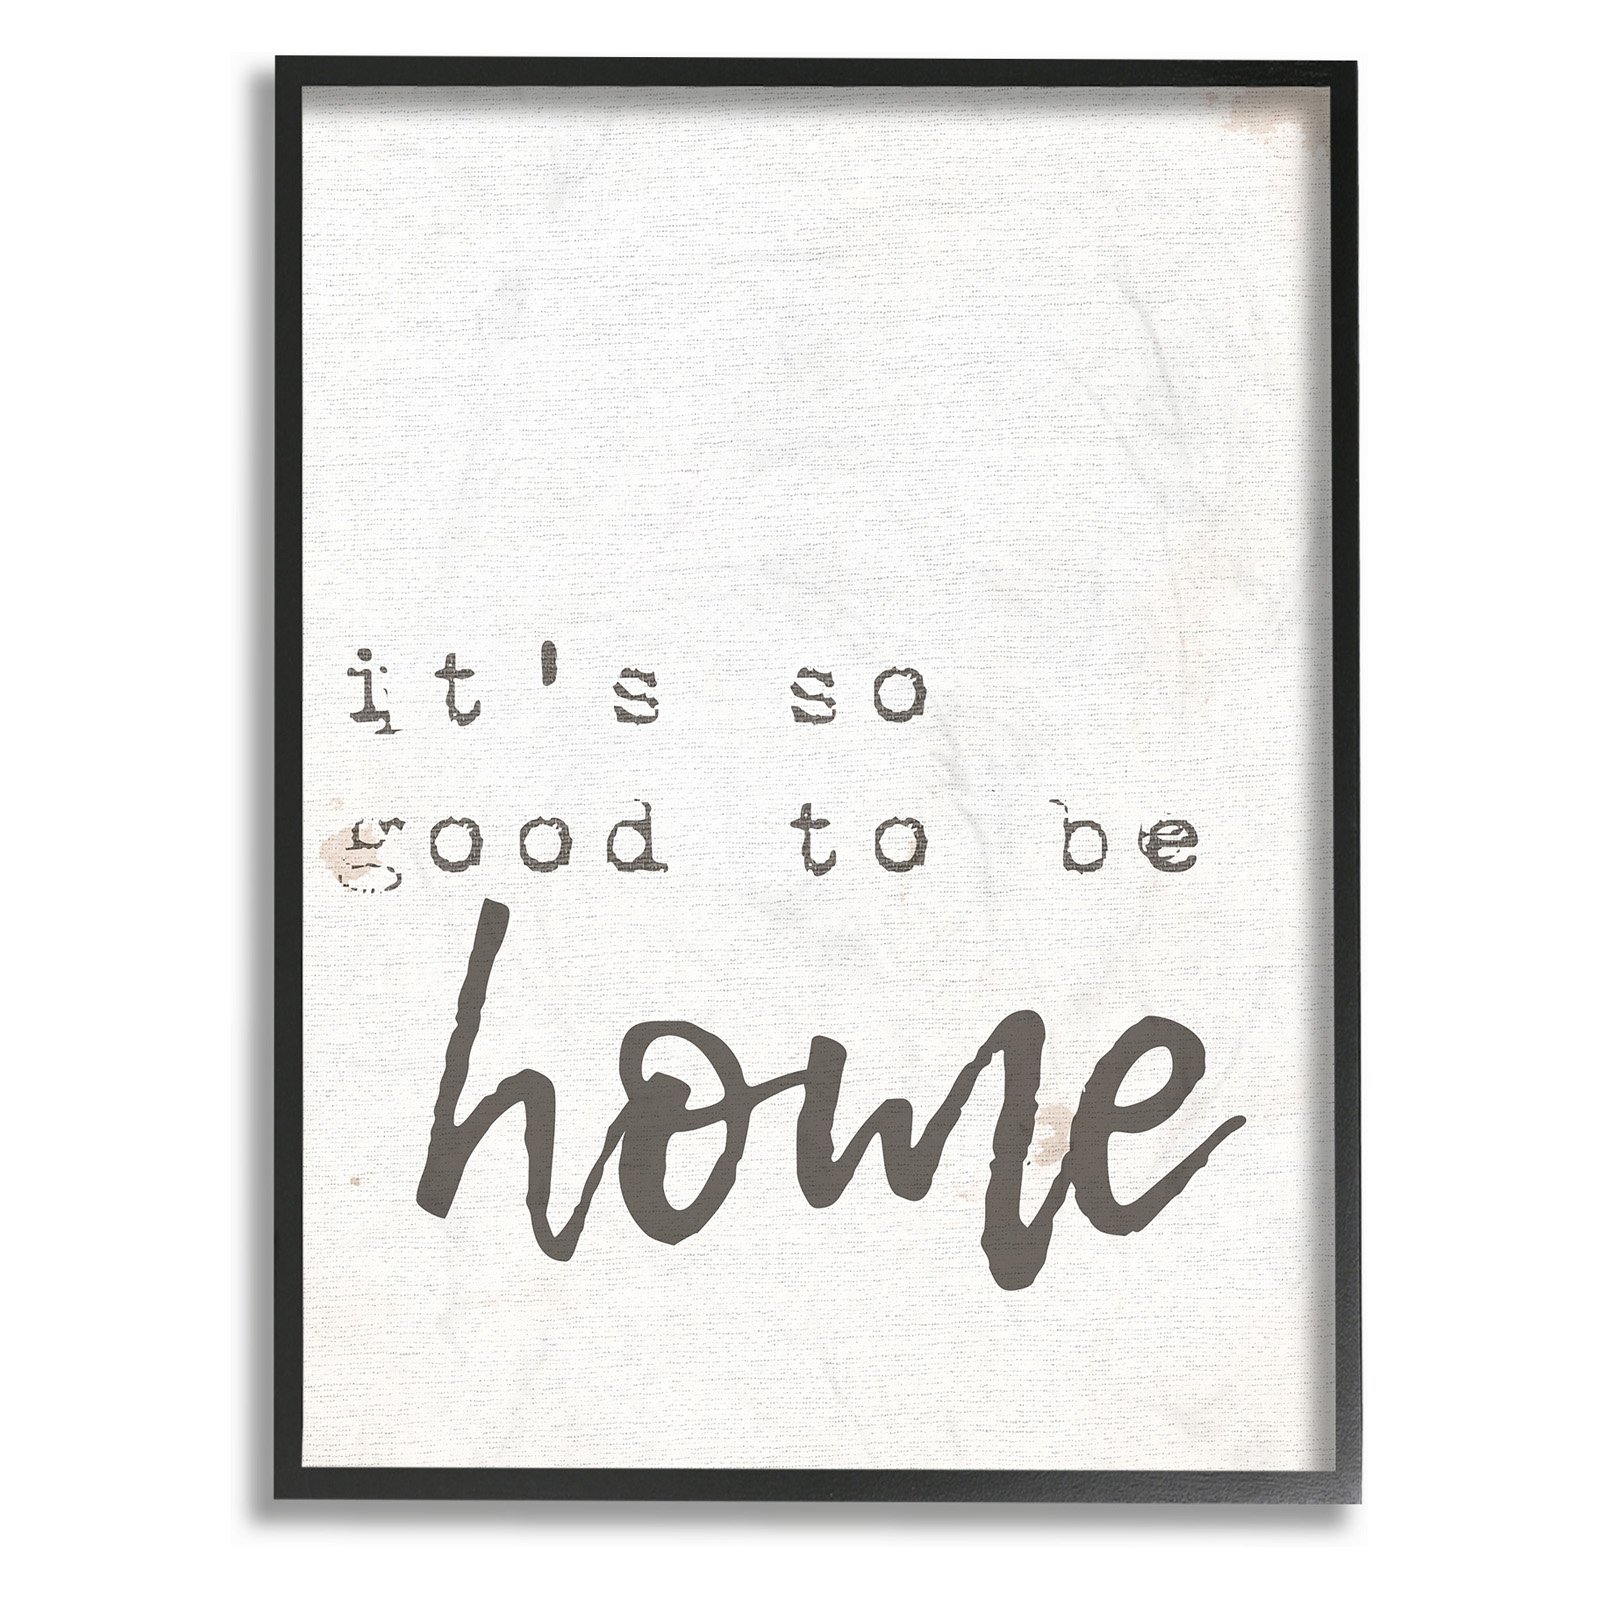 The Stupell Home Decor Collection Its So Good To Be Home Typewriter Typography Framed Wall Art - image 1 of 4